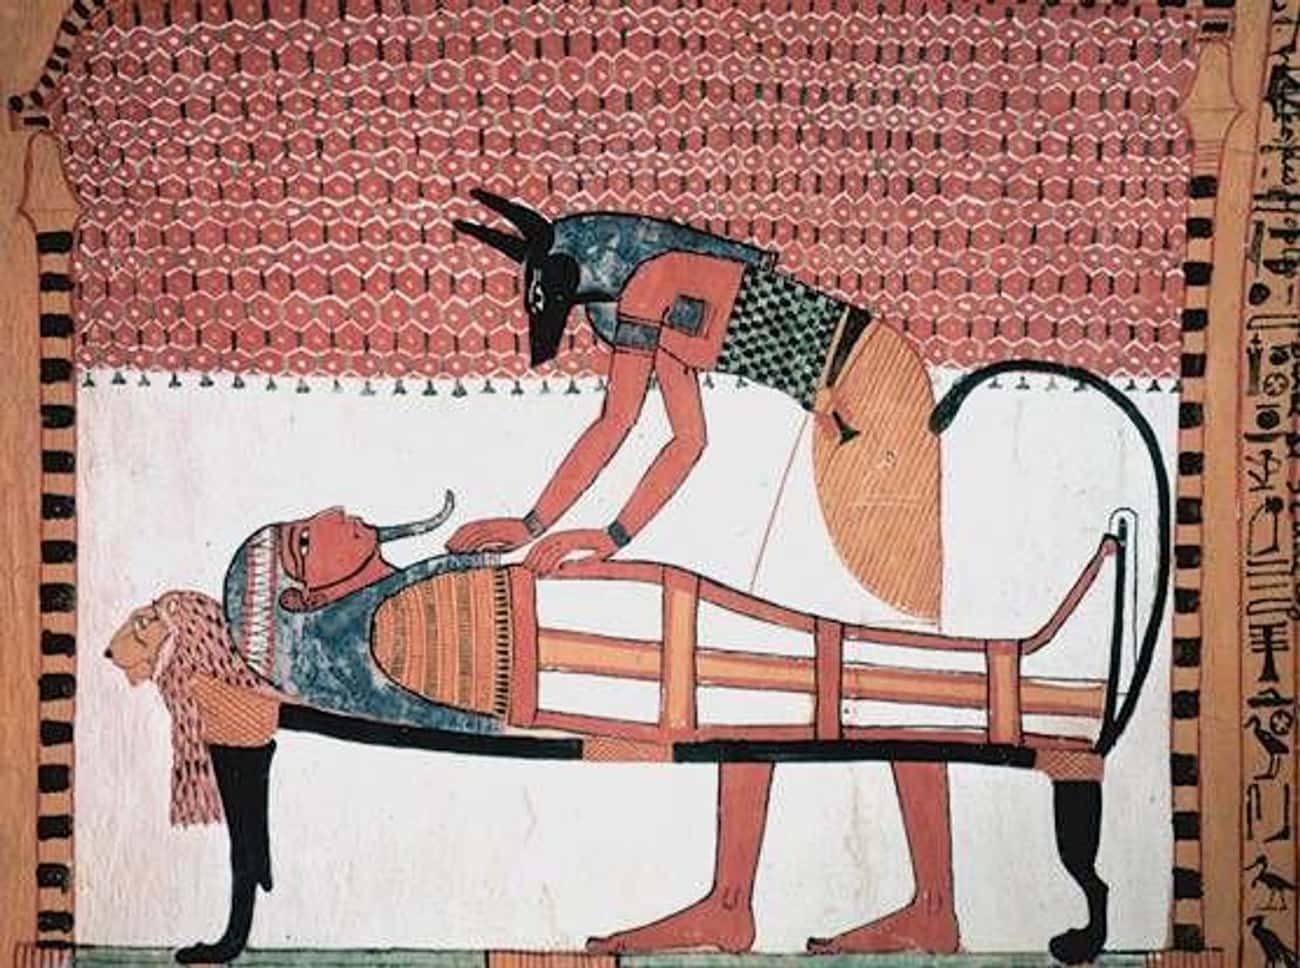 Anubis, The God Of Mummification, Wanted A Piece Of Everyone He Helped